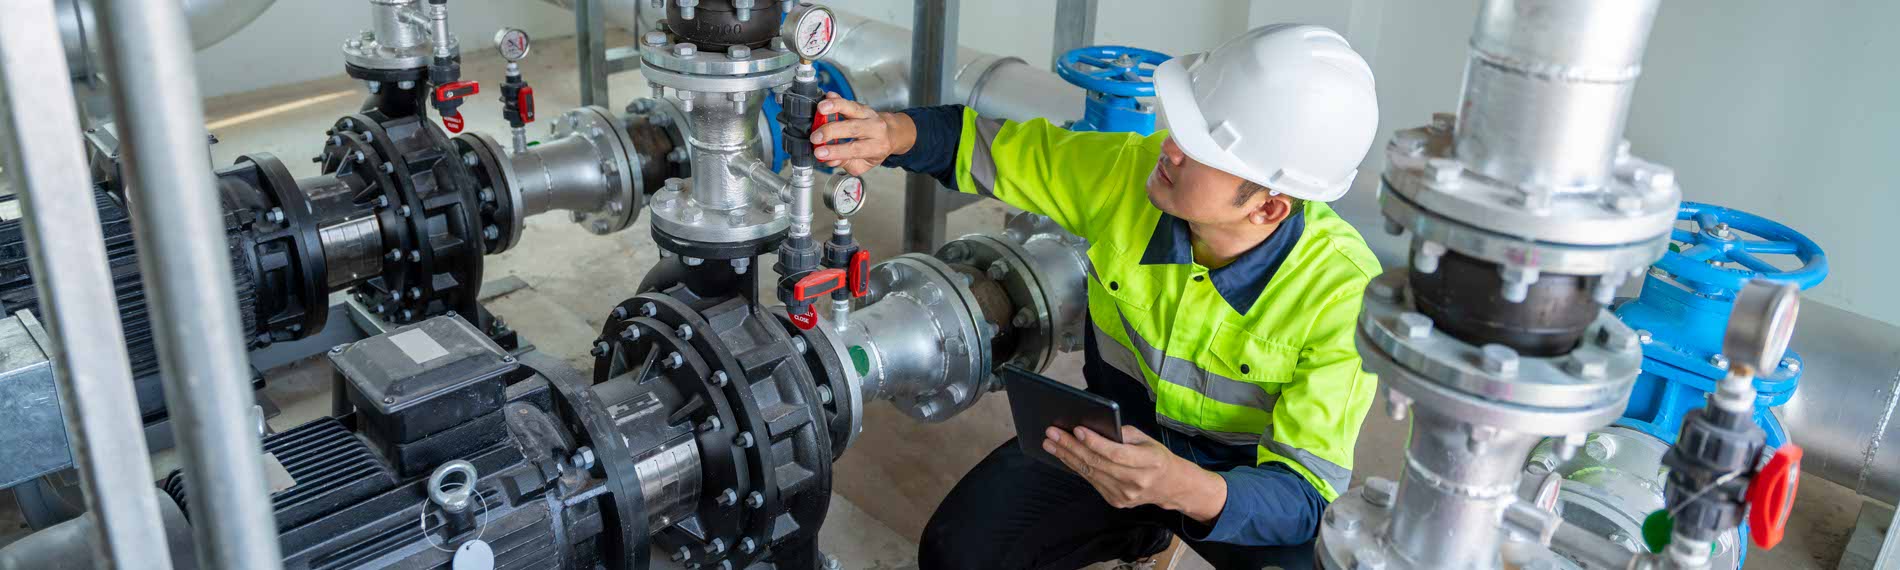 A valve technician inspecting a valve at a worksite.